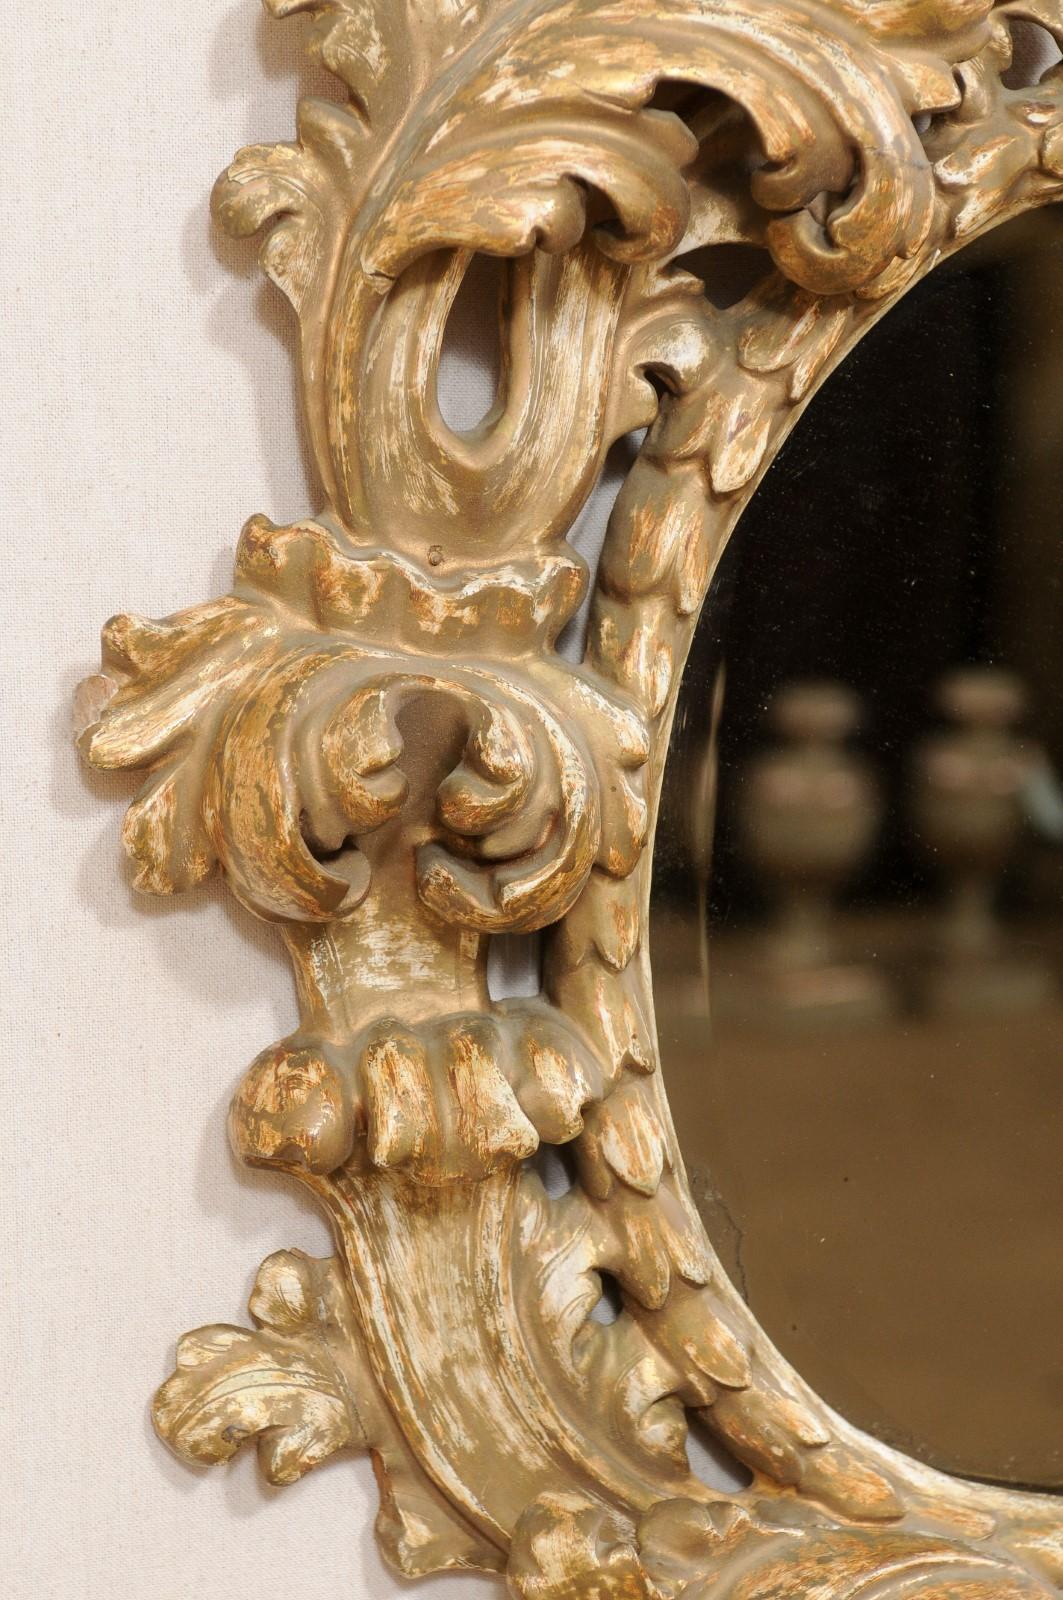 Italian Ornate Acanthus-Carved Mirror w/Oblong, Oval-Shaped Glass, 18th/19th C. For Sale 3